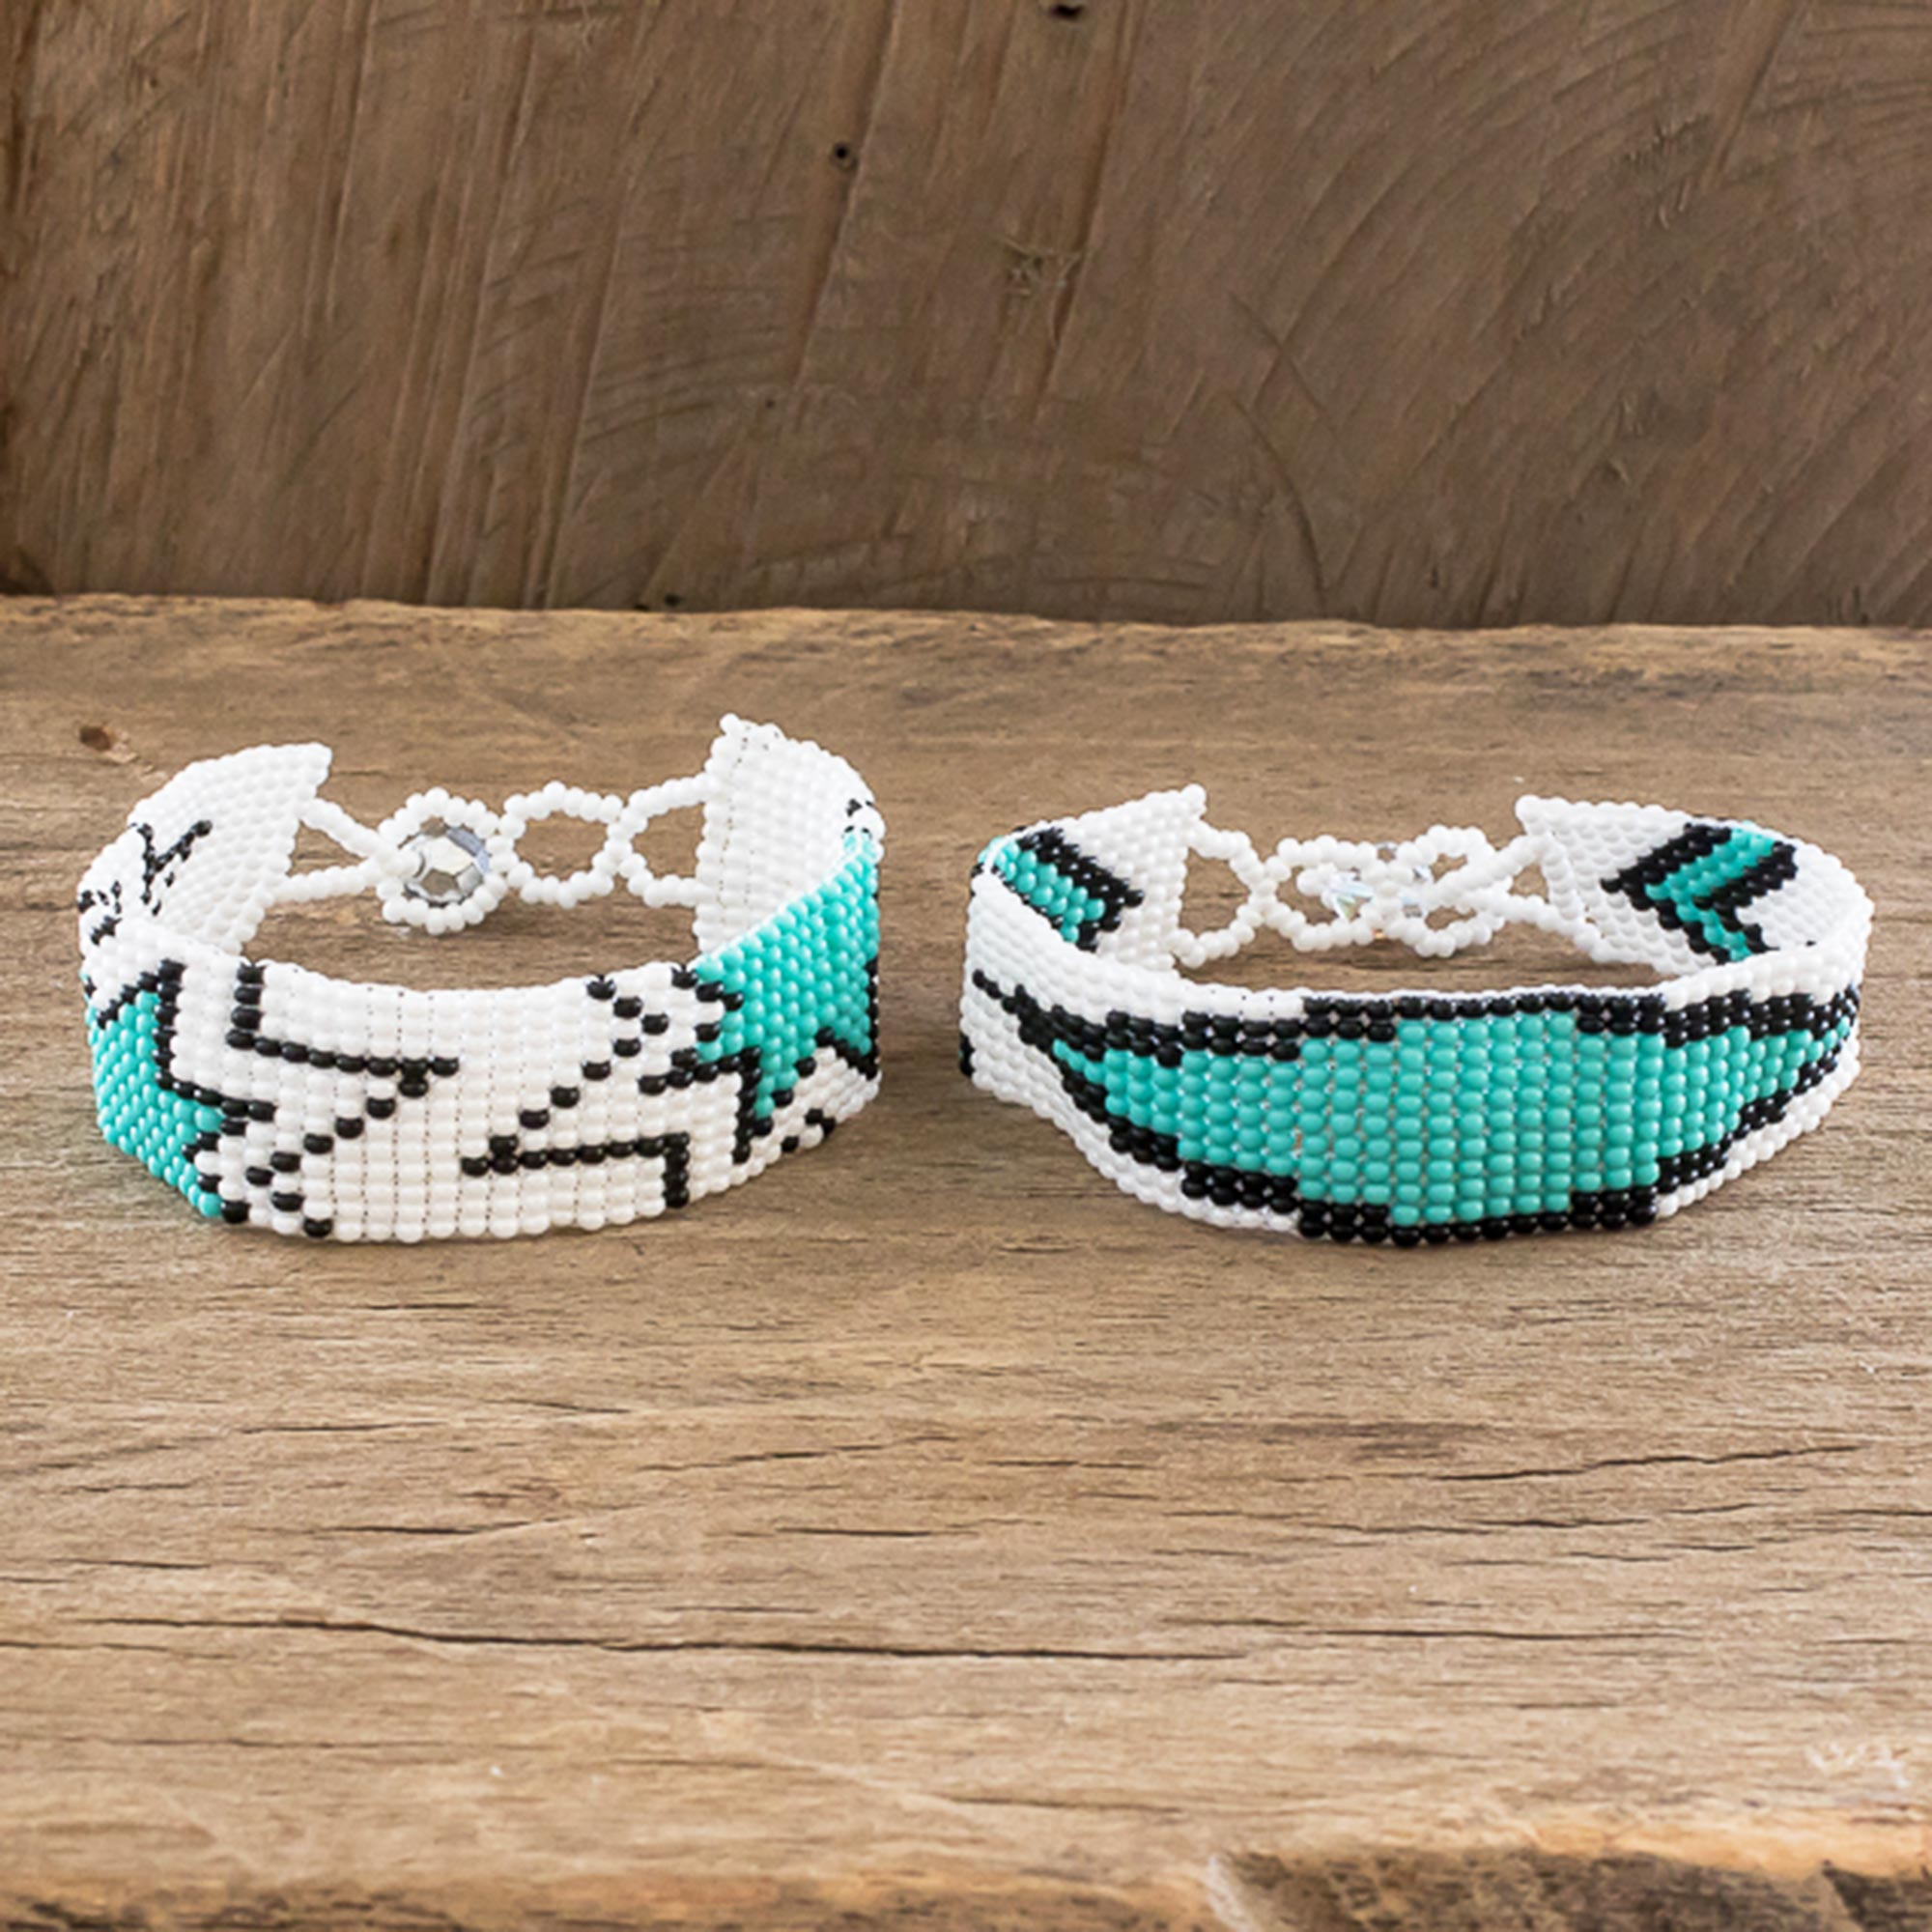 Friendship Bracelets Made by Indigenous Women Artisans in Mexico